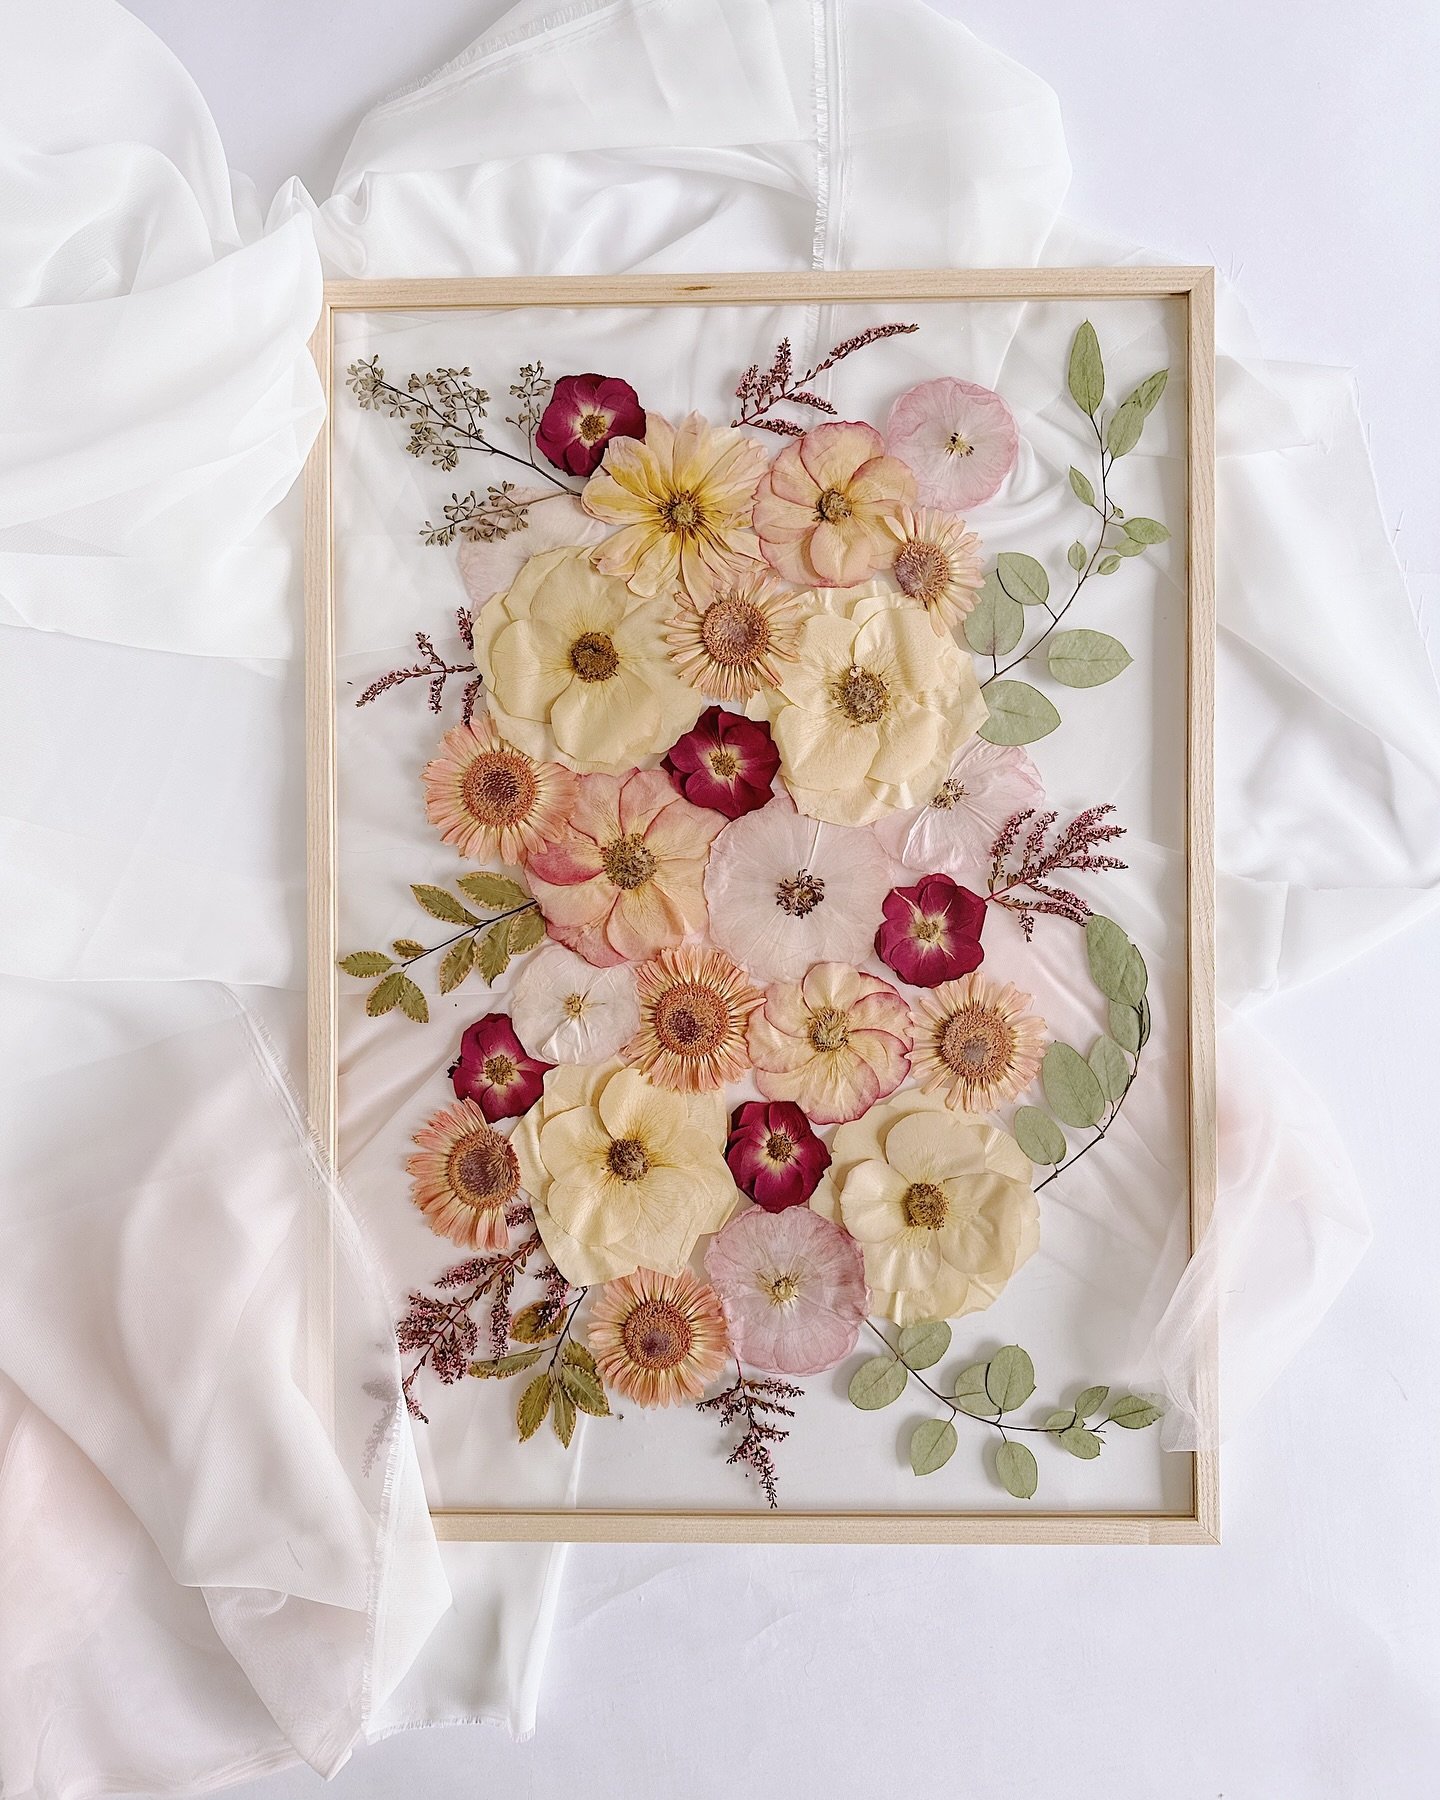 Bloomed Gallery is a premier floral preservation studio proudly serving Seattle and beyond! 🌸✨

They specialize in pressed and dried florals beautifully designed in frames or shadowboxes. Discover how @BloomedGallery can help you turn your wedding f